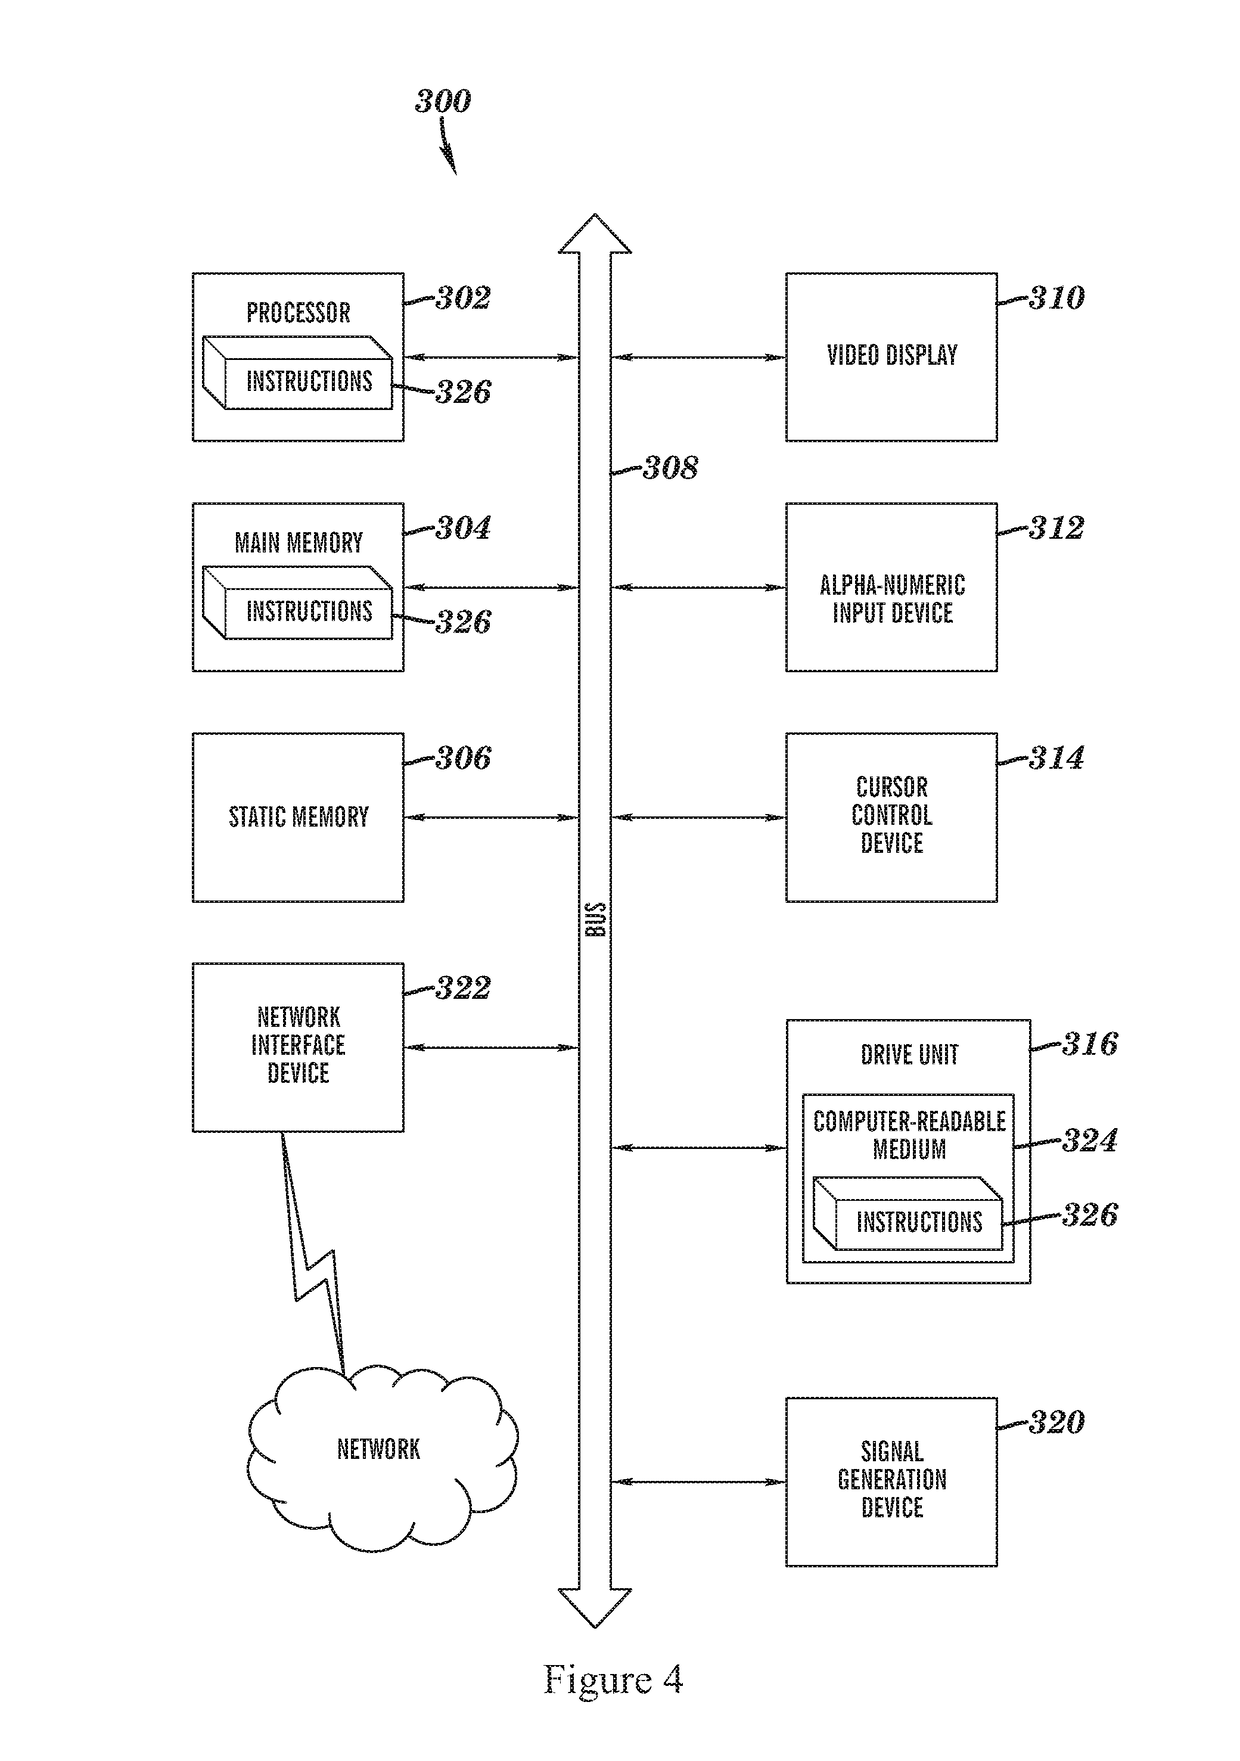 Method and apparatus for hypervisor based monitoring of system interactions